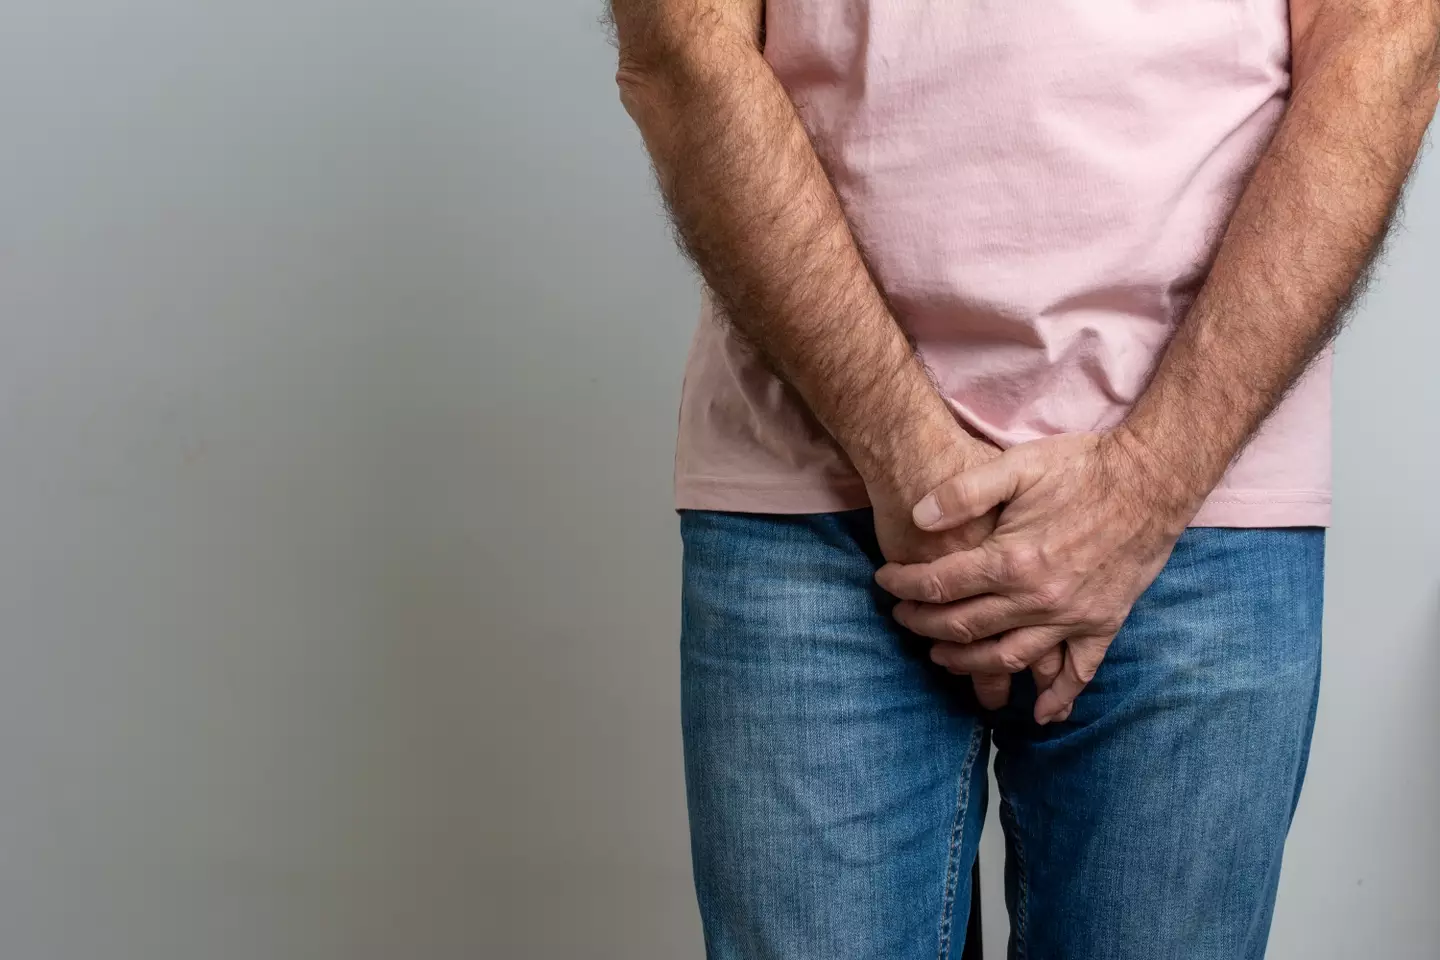 Doctors warned lads are risking causing painful issues with their penis.